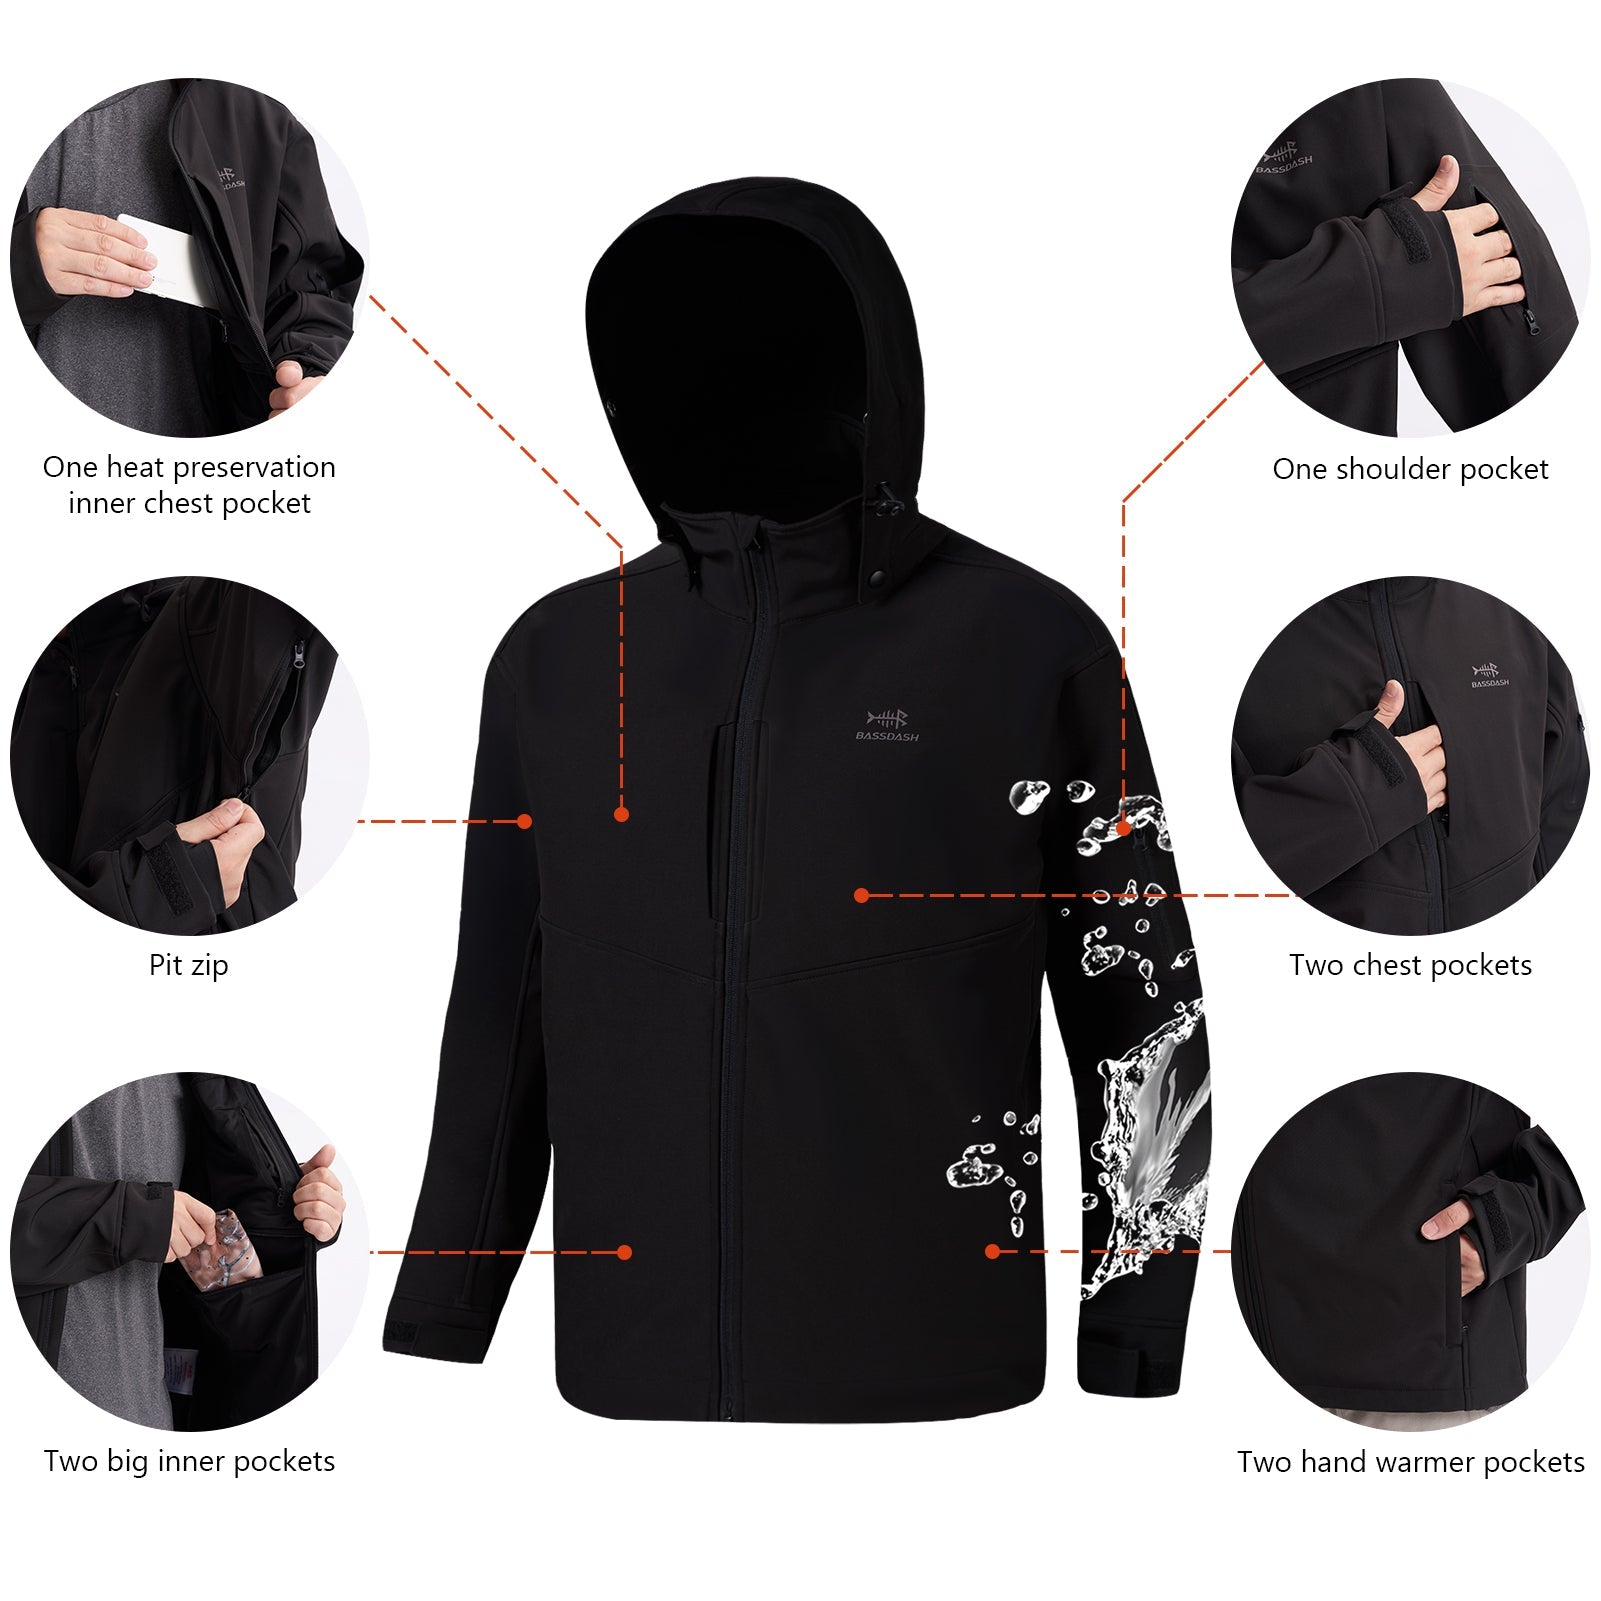 Men's Splice Insulated Softshell Jackets with Face Cover